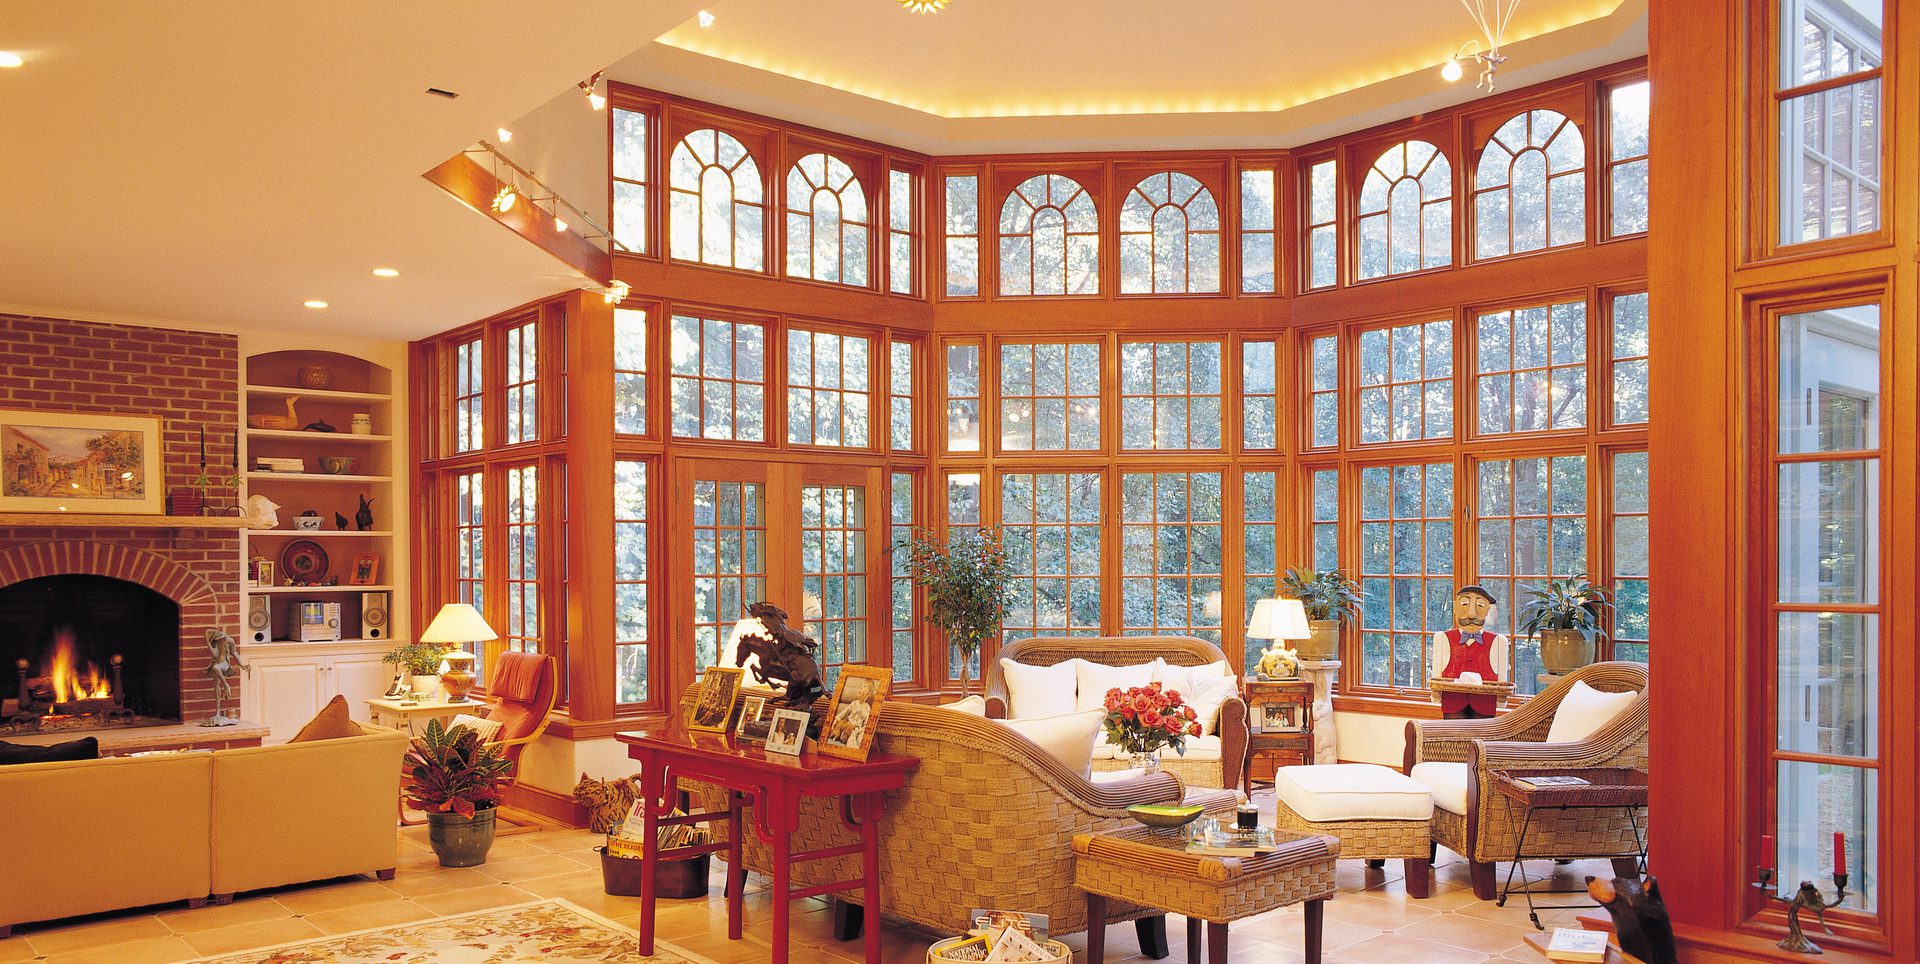 A living room with many windows and furniture